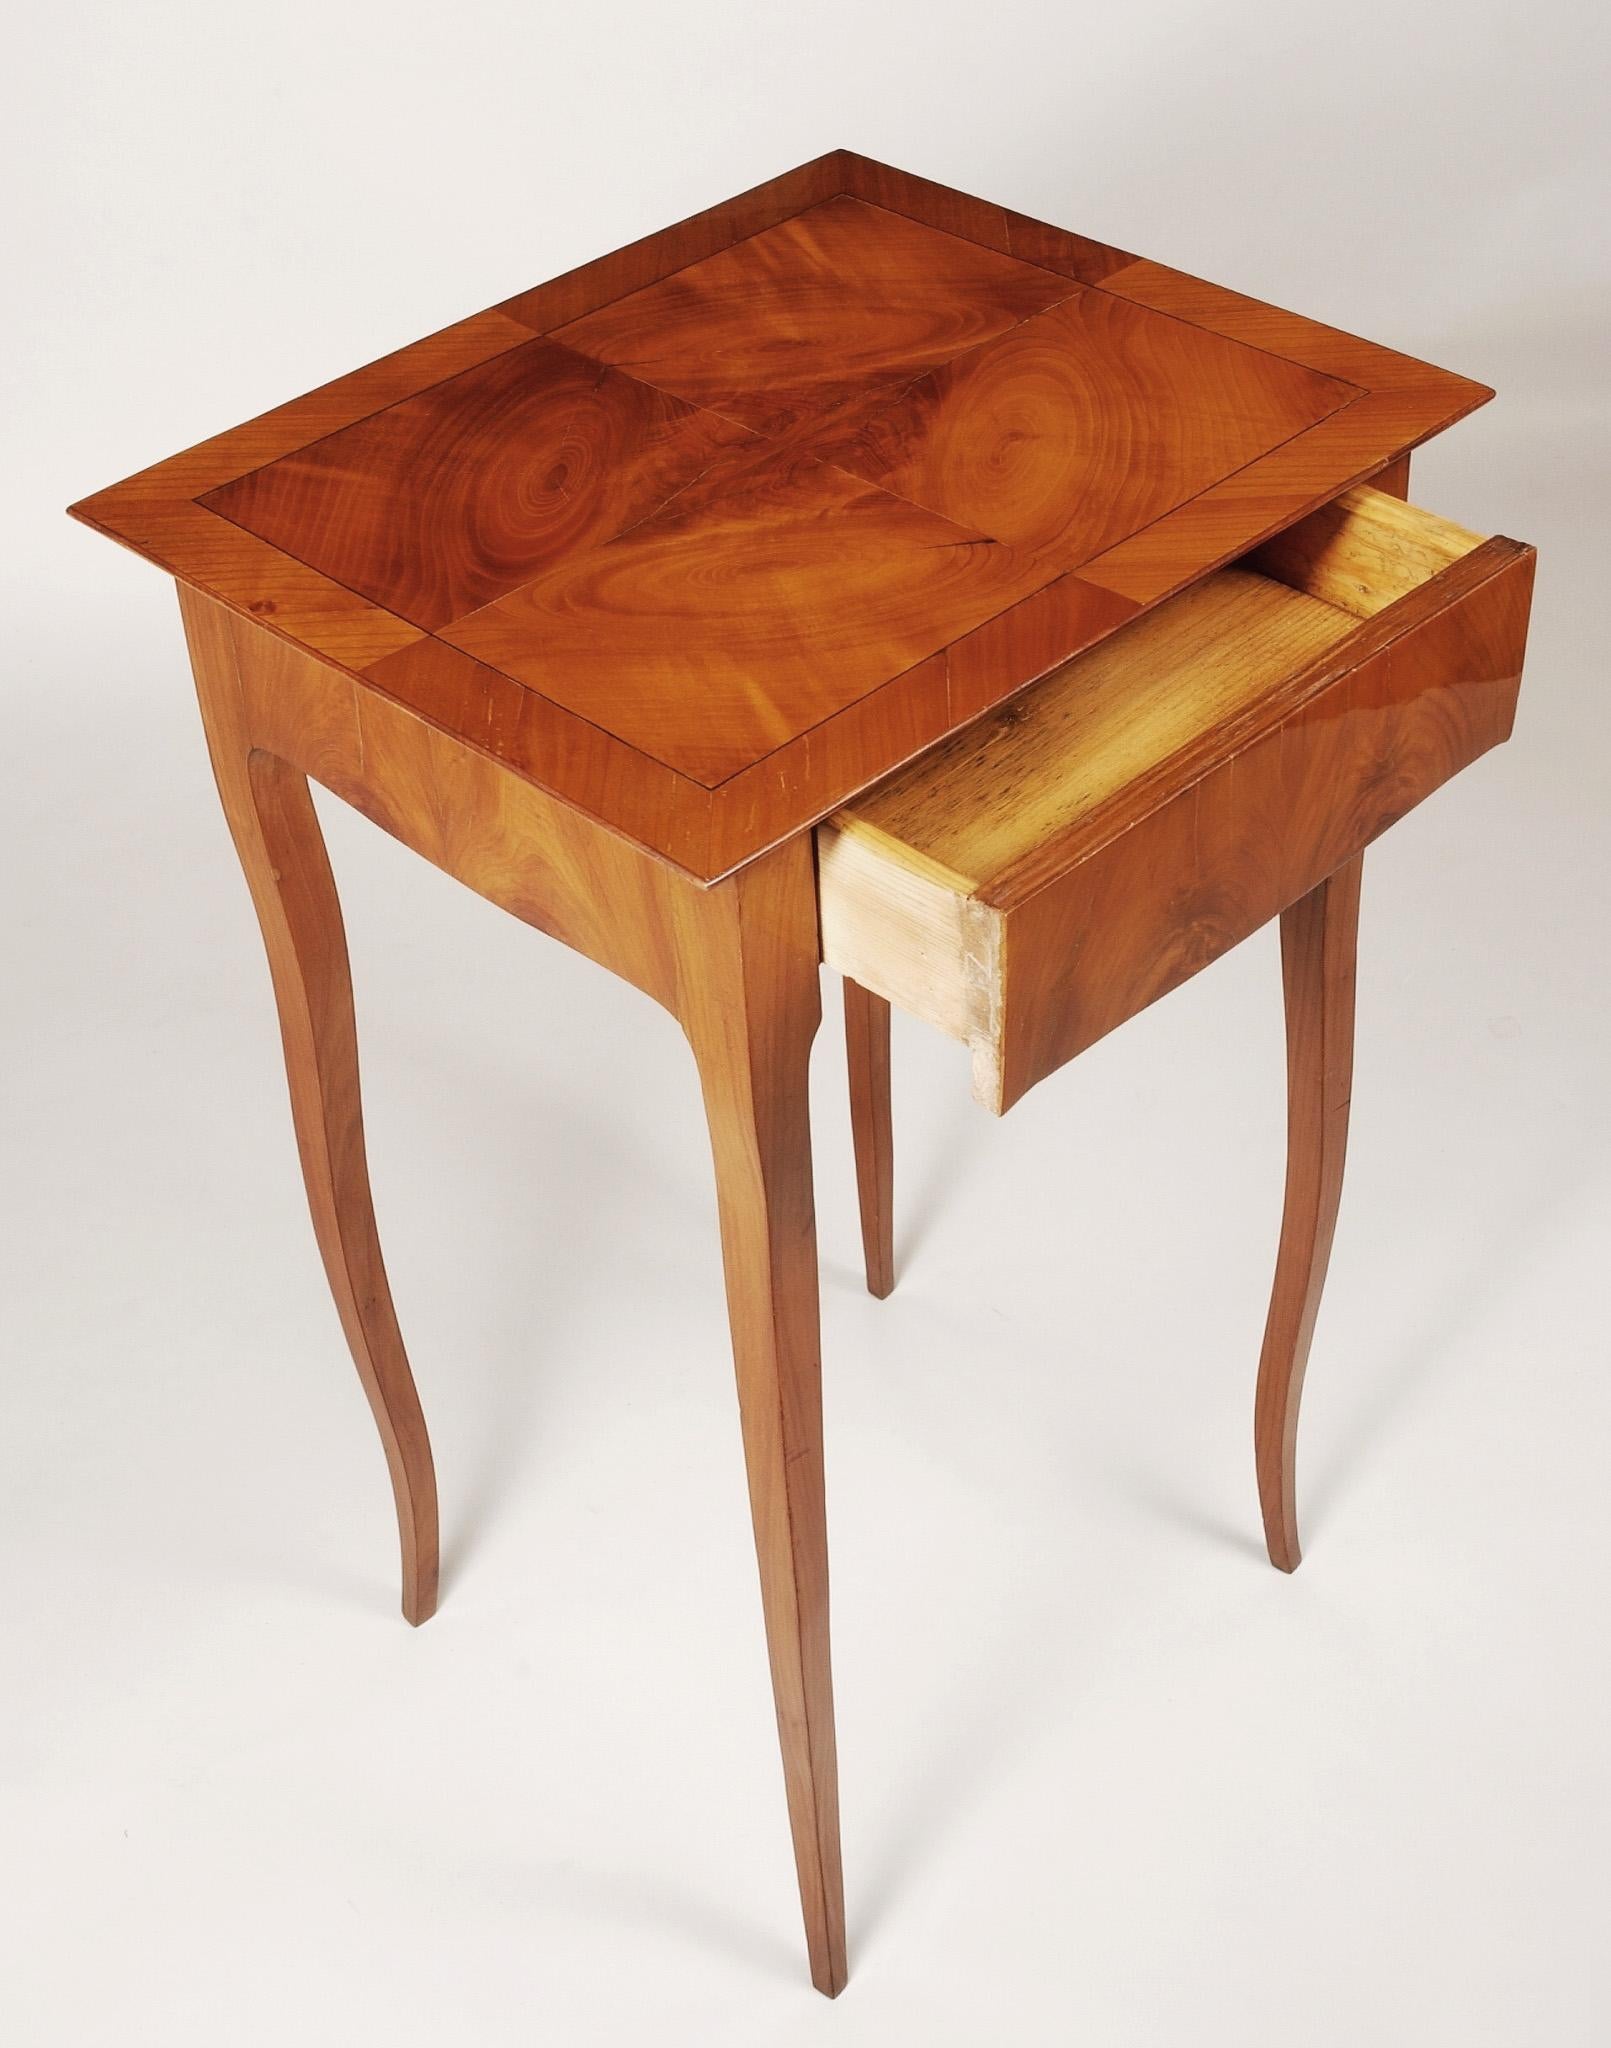 Shipping to any US port only for $290 USD

French Biedermeier small table
Period: 1840-1849
Material: Cherry tree
Shellac polished.

We guarantee safe a the cheapest air transport from Europe to the whole world within 7 days.
The price is the same